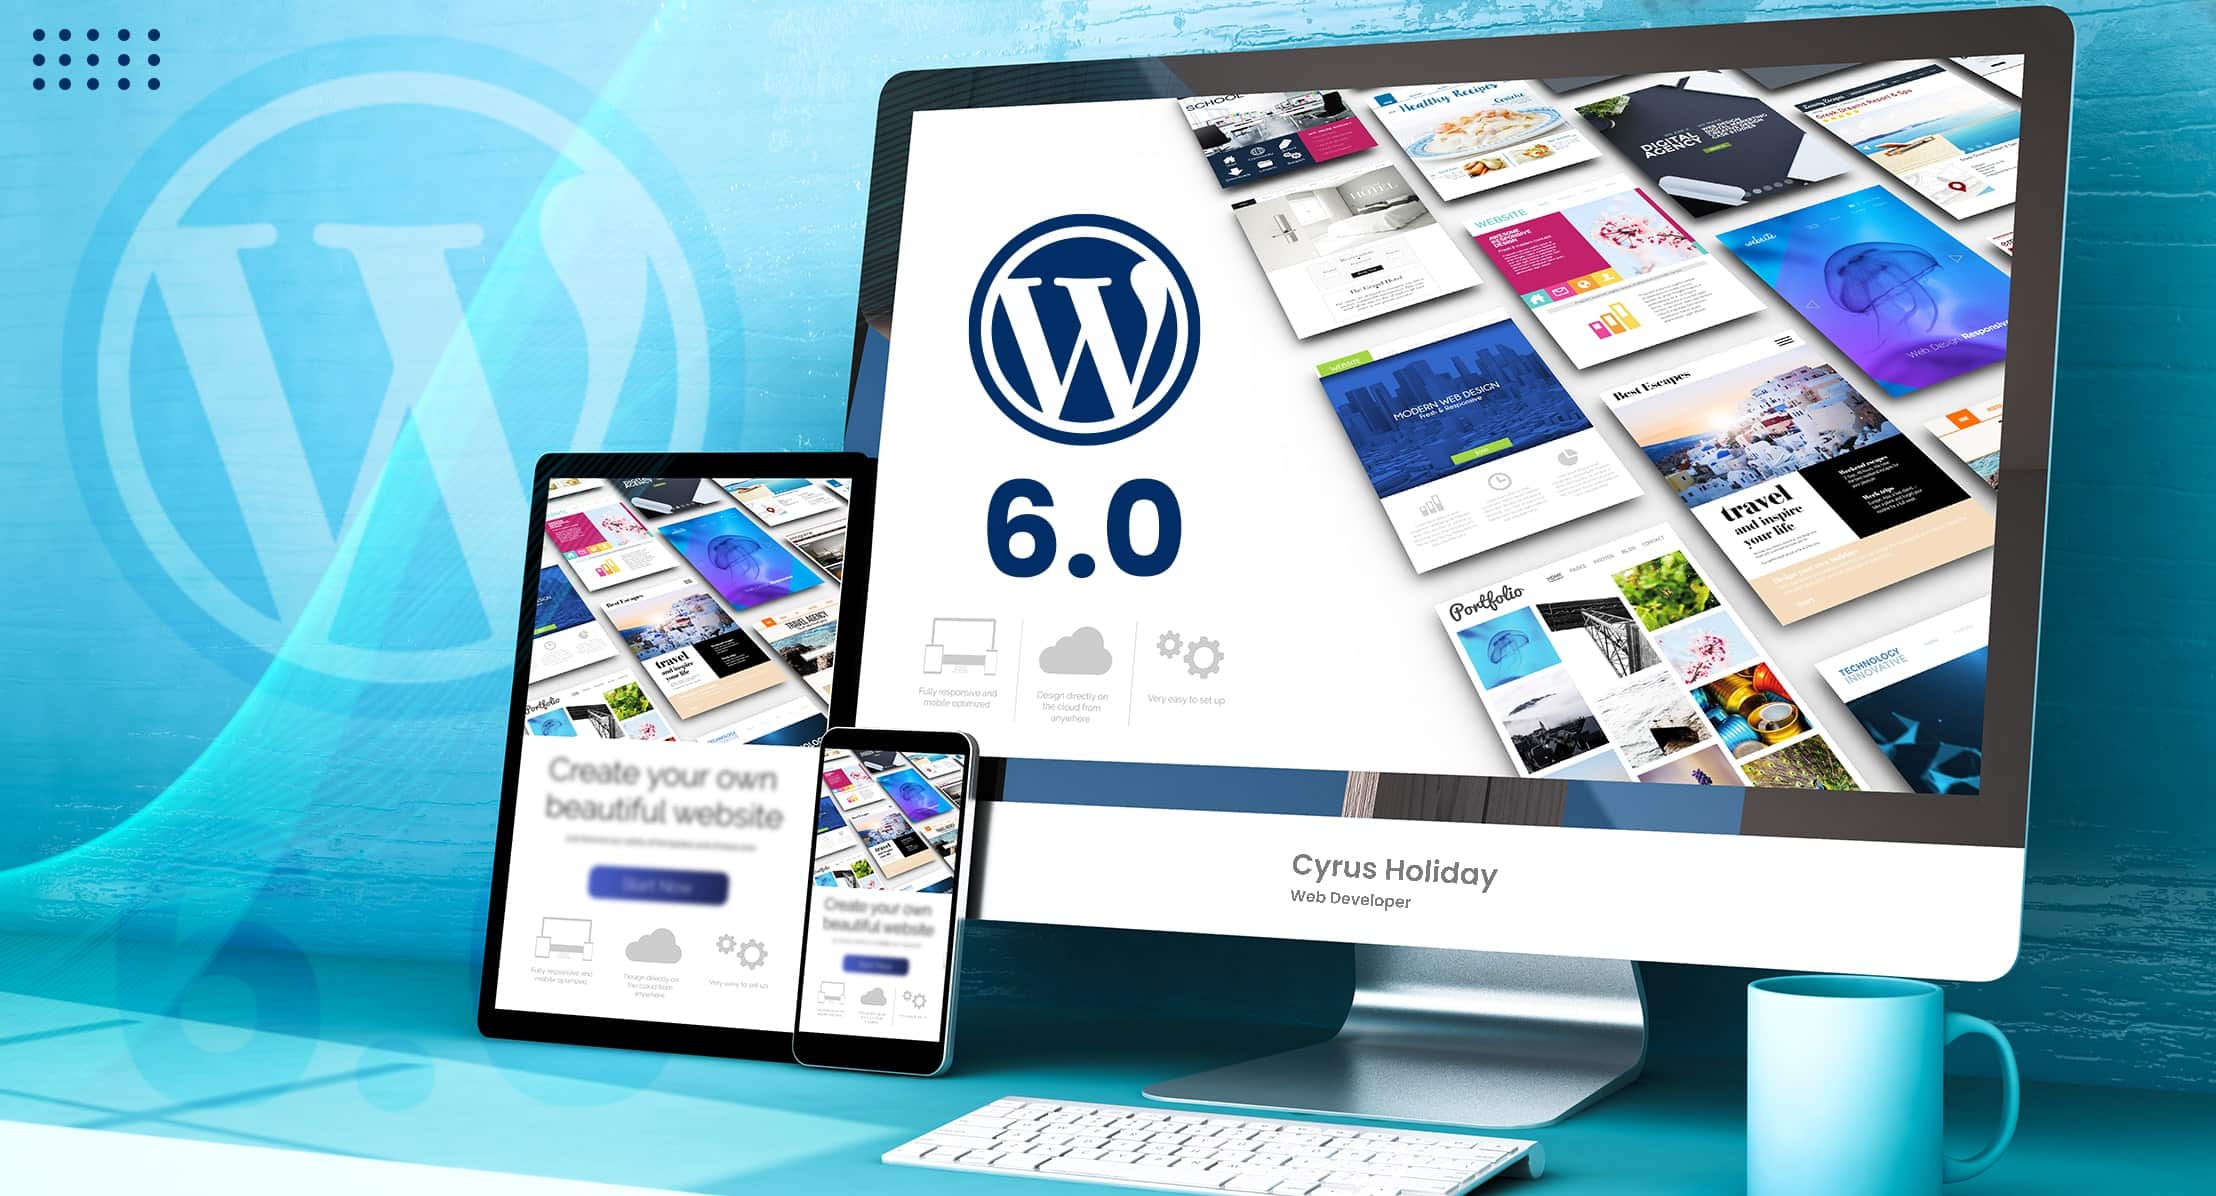 Find Comes With Newly Launched WordPress